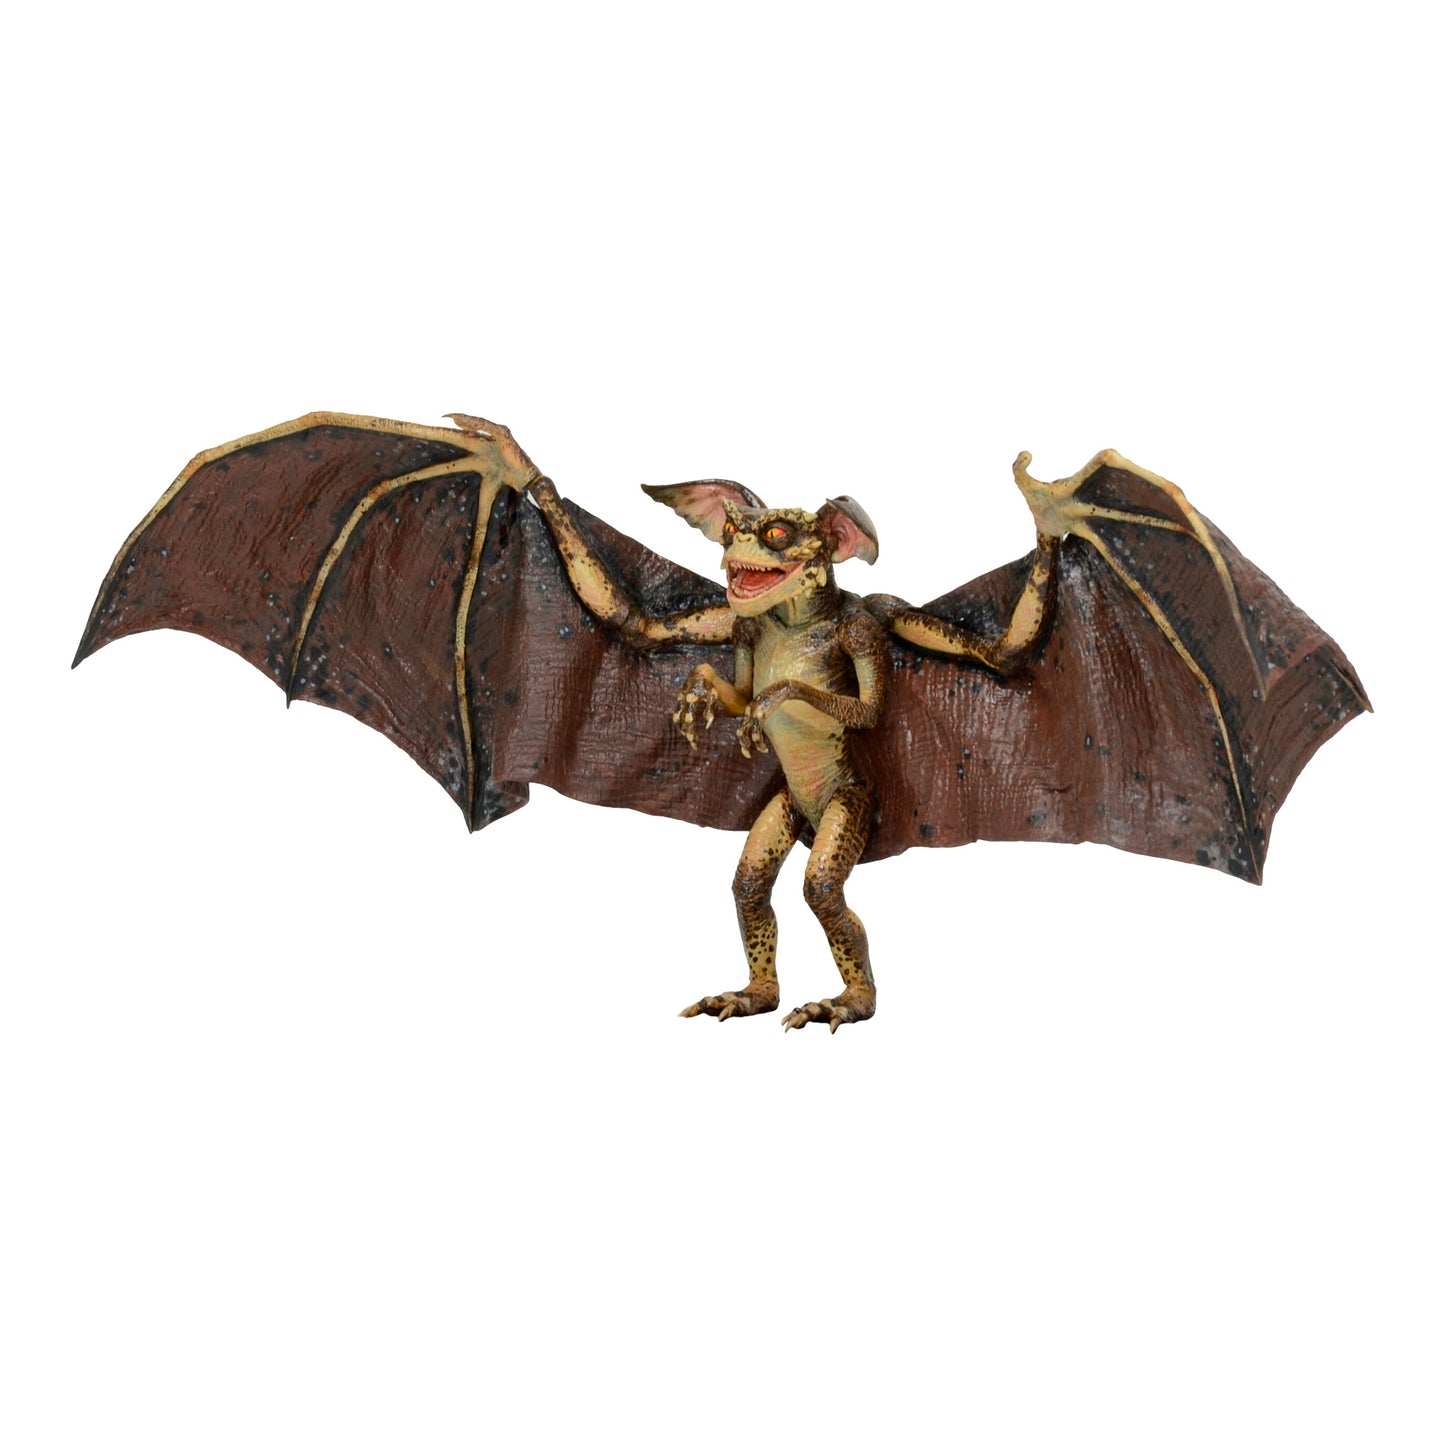 NECA: Gremlins 2 - The New Batch Deluxe Bat Gremlin 7" Tall Action Figure